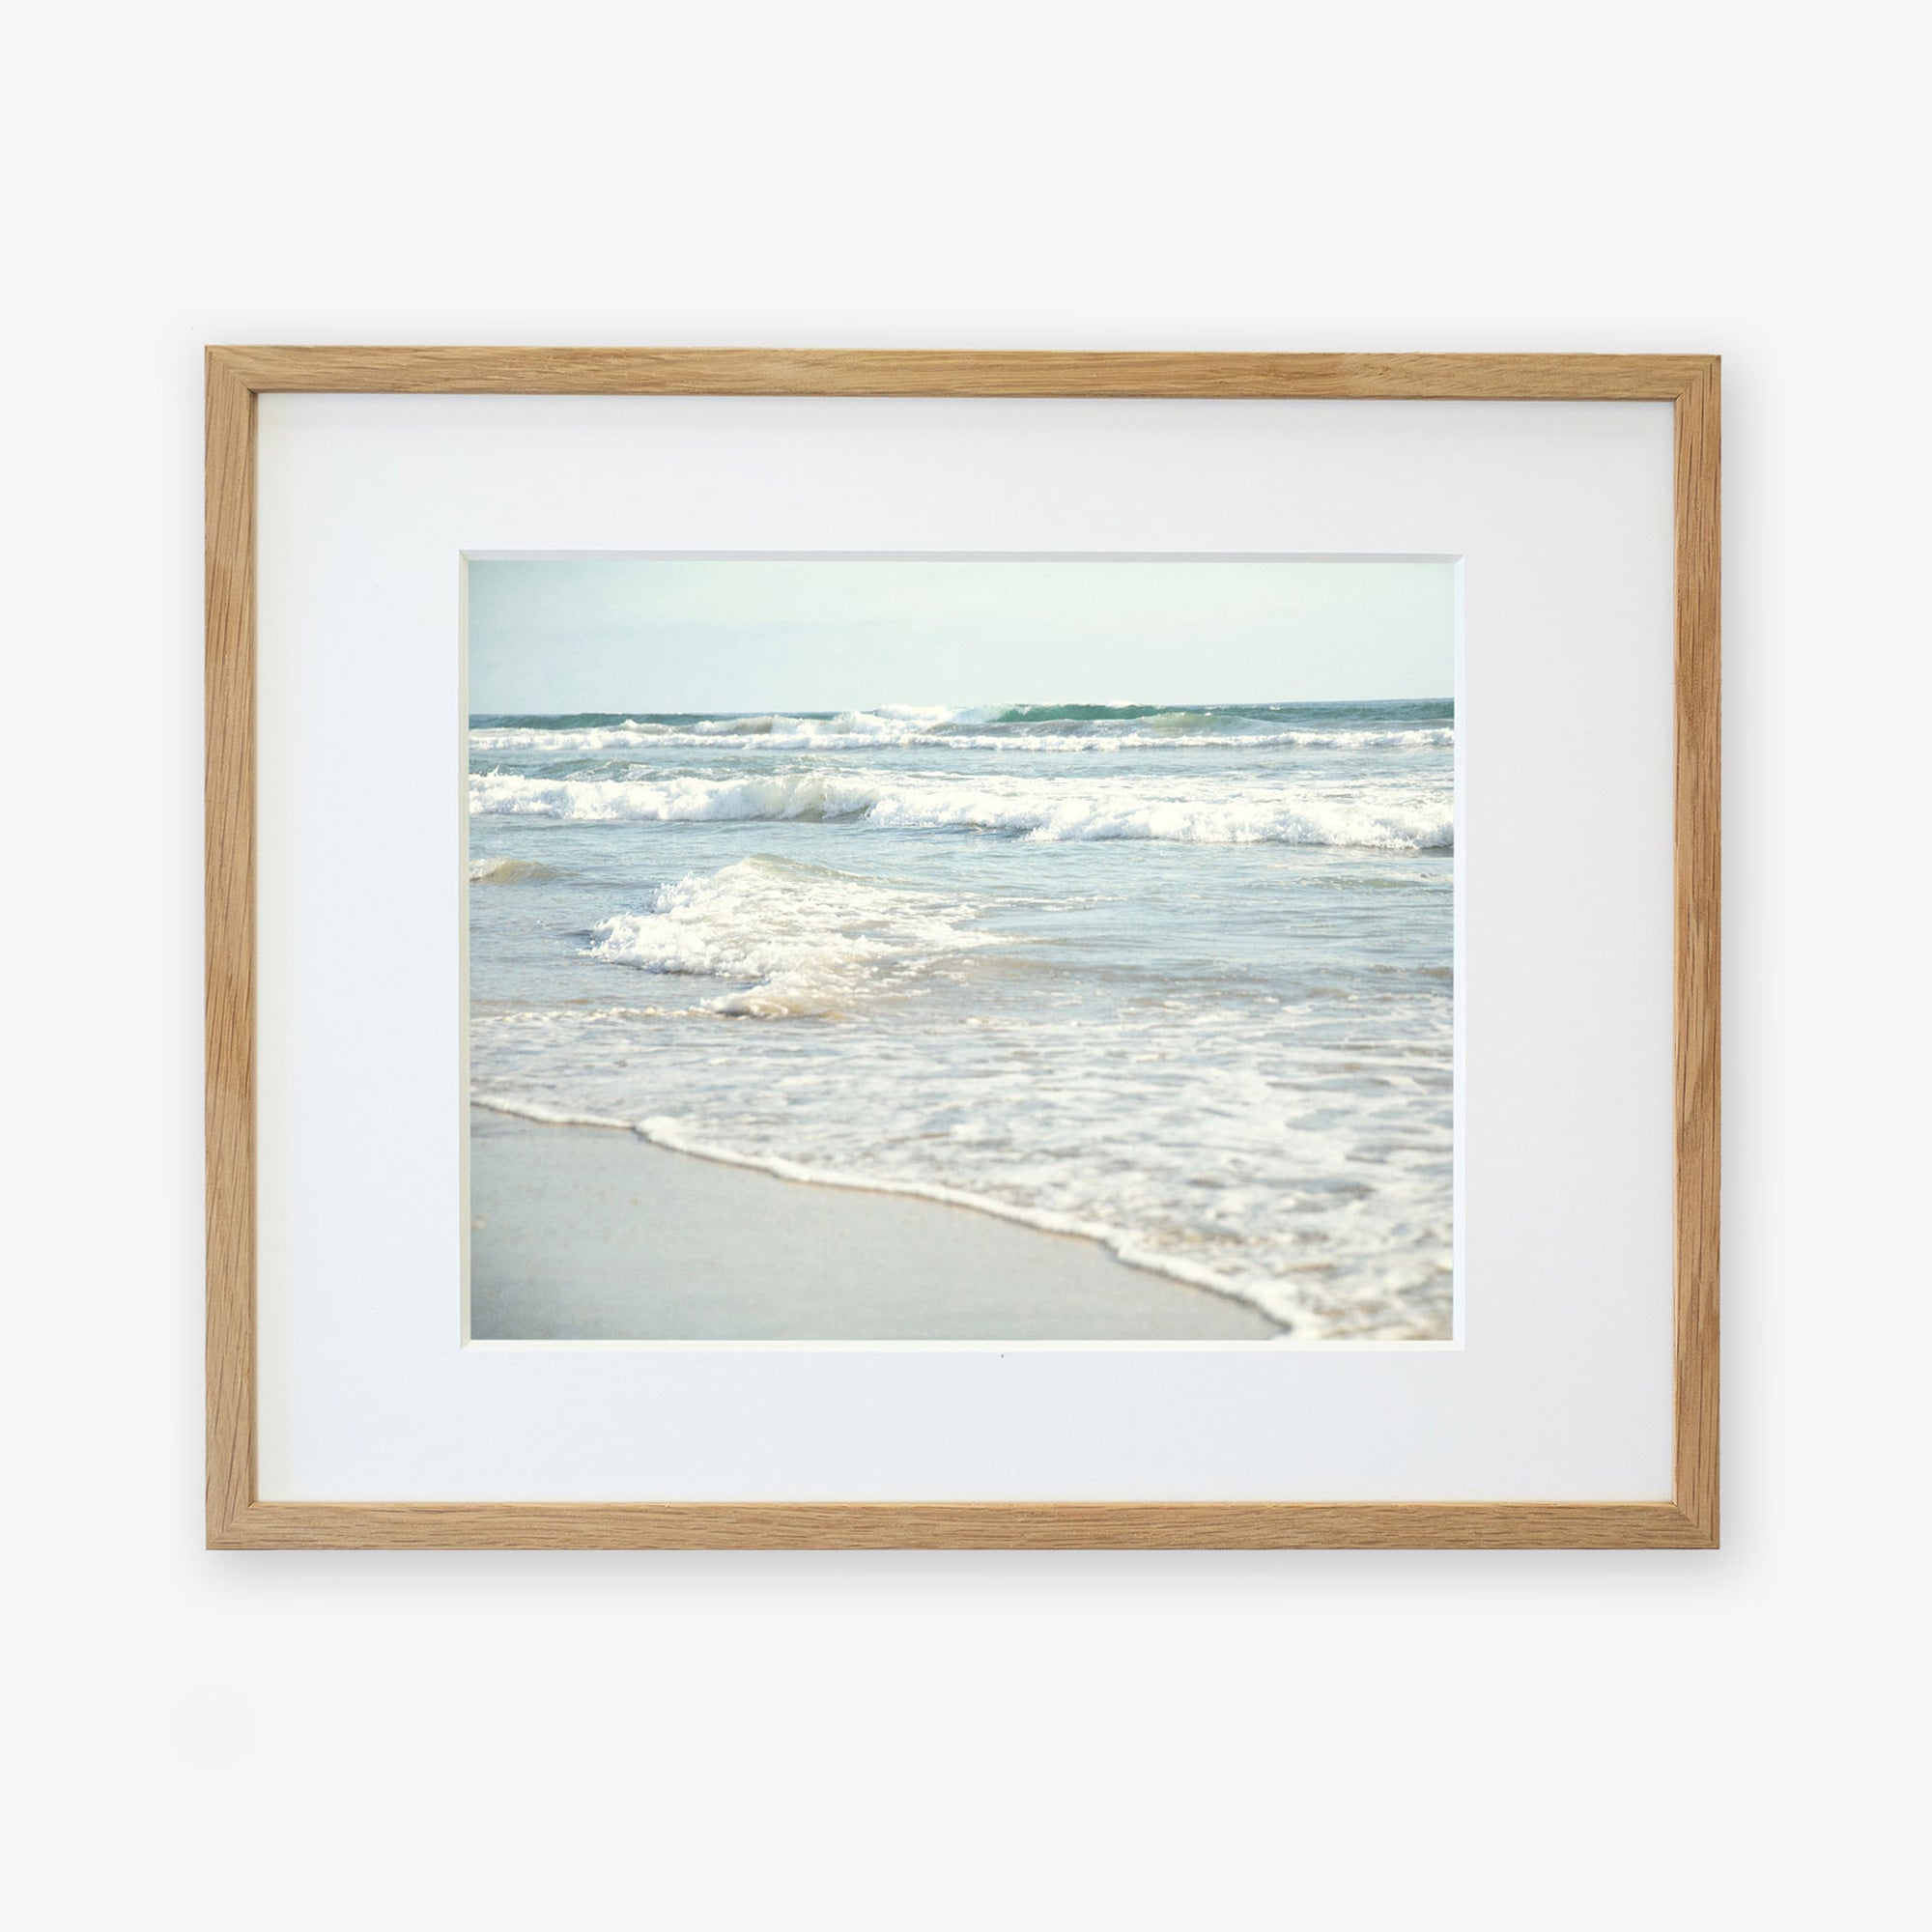 A framed photograph of a tranquil Carlsbad State Beach scene, with gentle waves lapping at the shore under a clear sky. The frame is simple and made of light wood, mounted on a white Offley Green Coastal Beach Print in California 'Surf and Sun'.